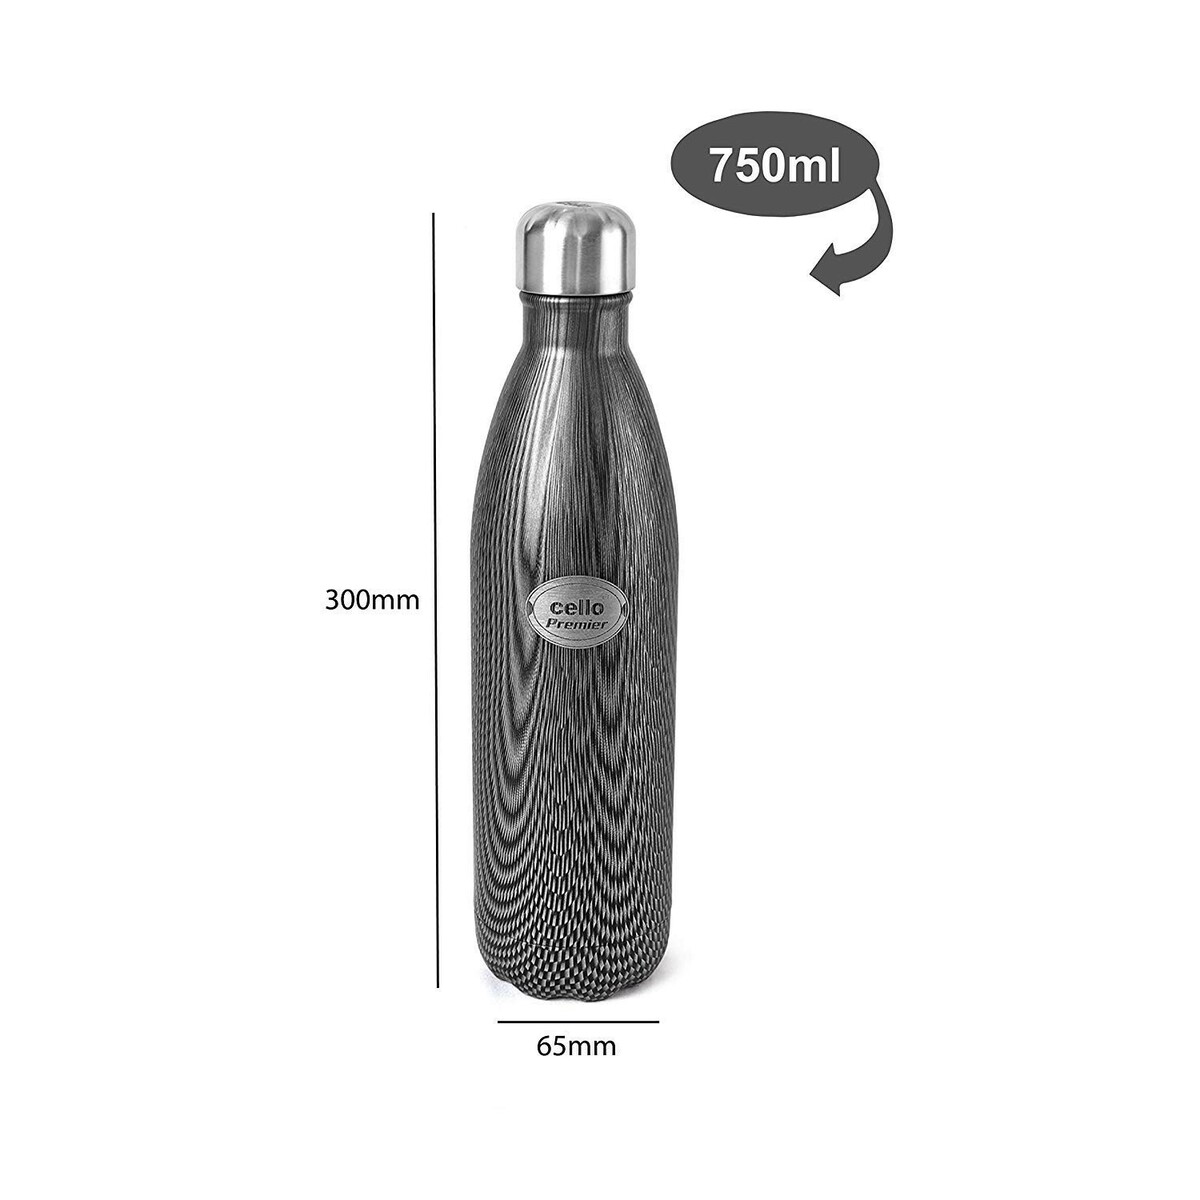 Cello Premier Stainless Steel Flask 750ml